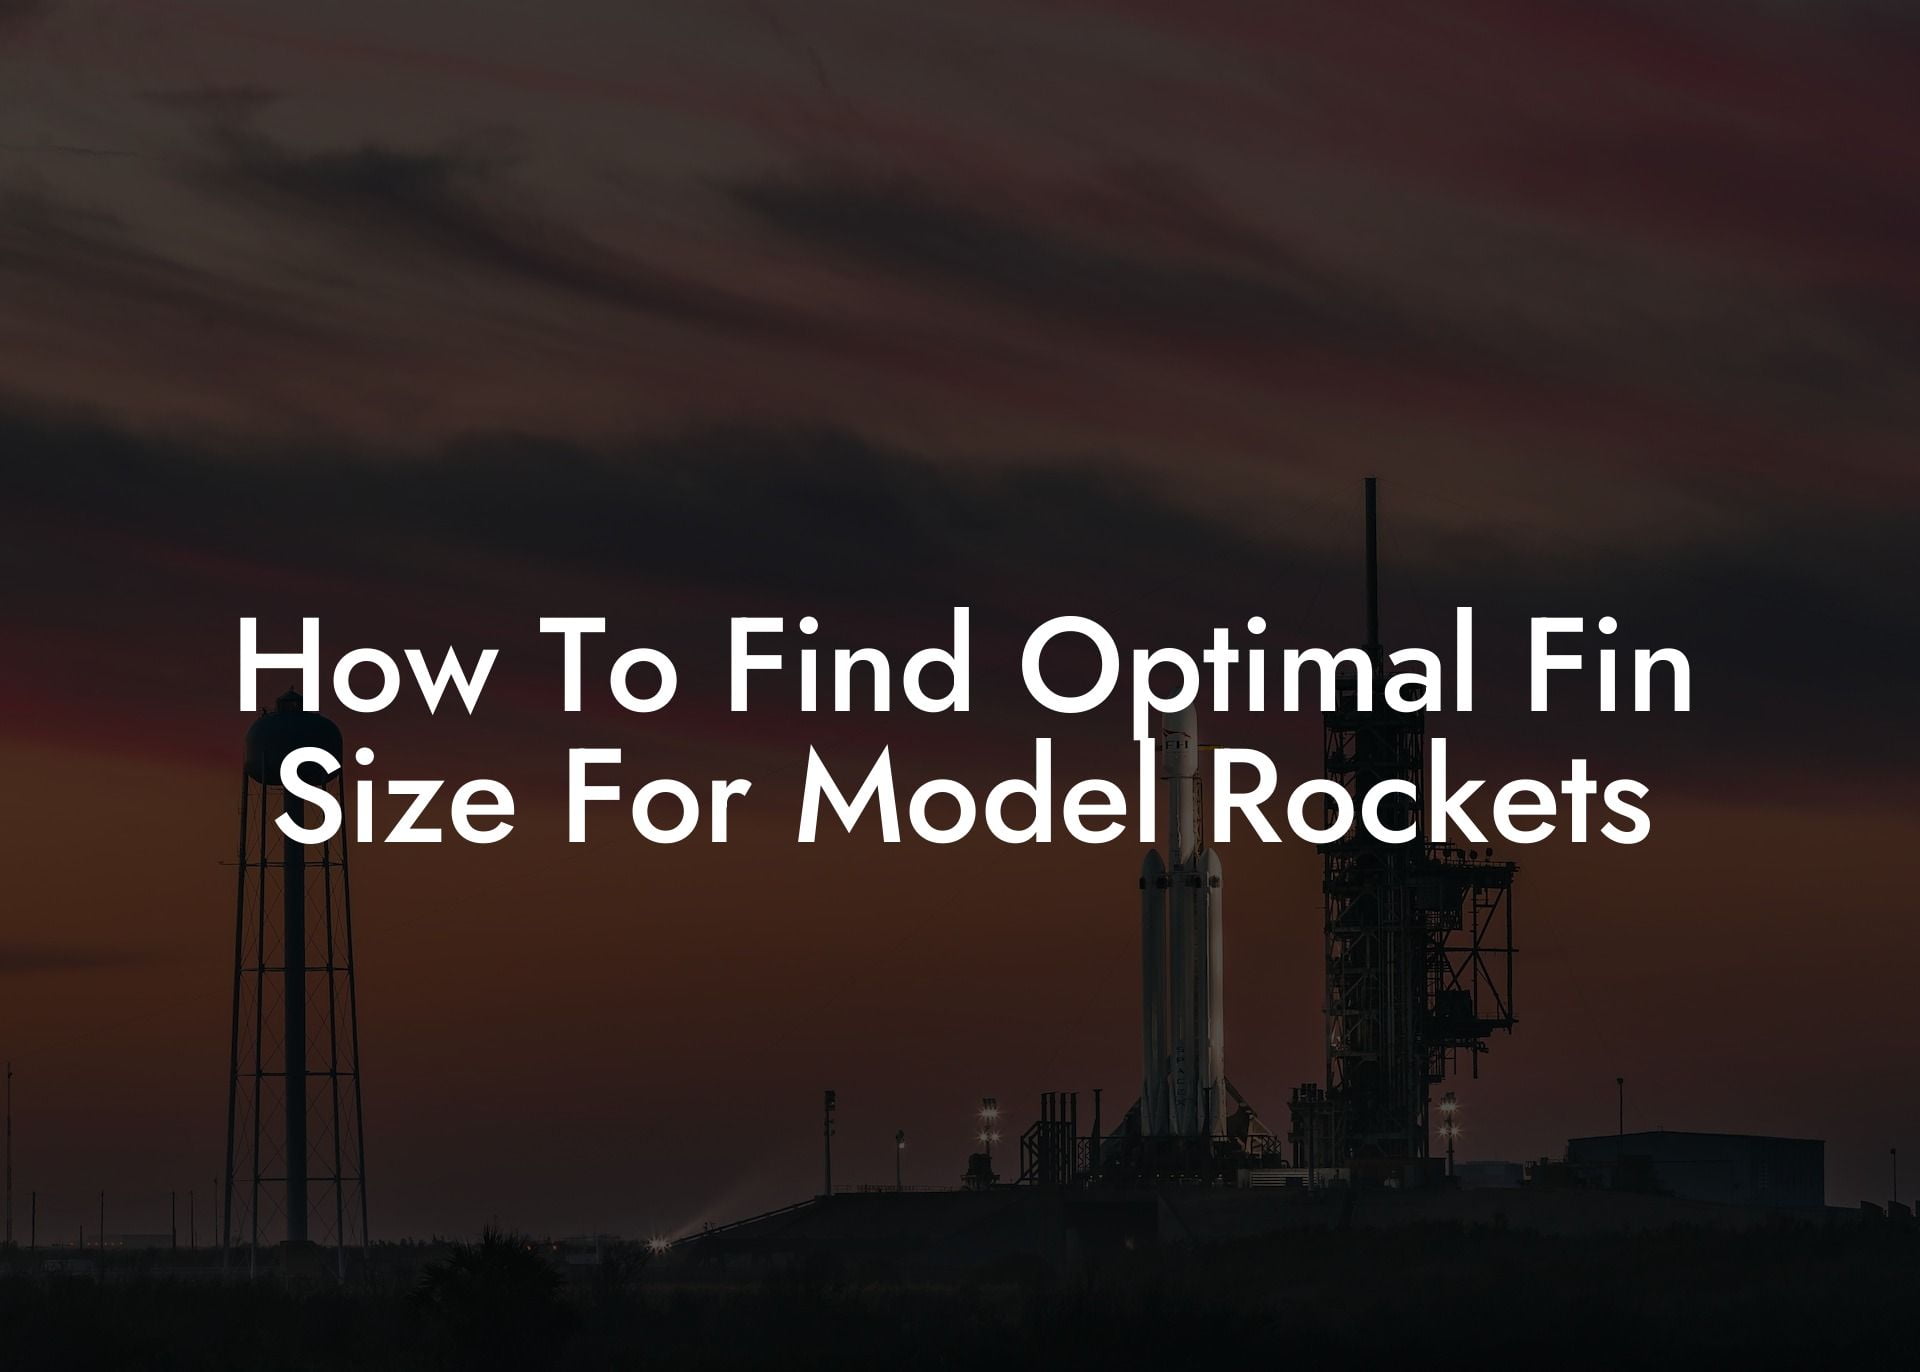 How To Find Optimal Fin Size For Model Rockets